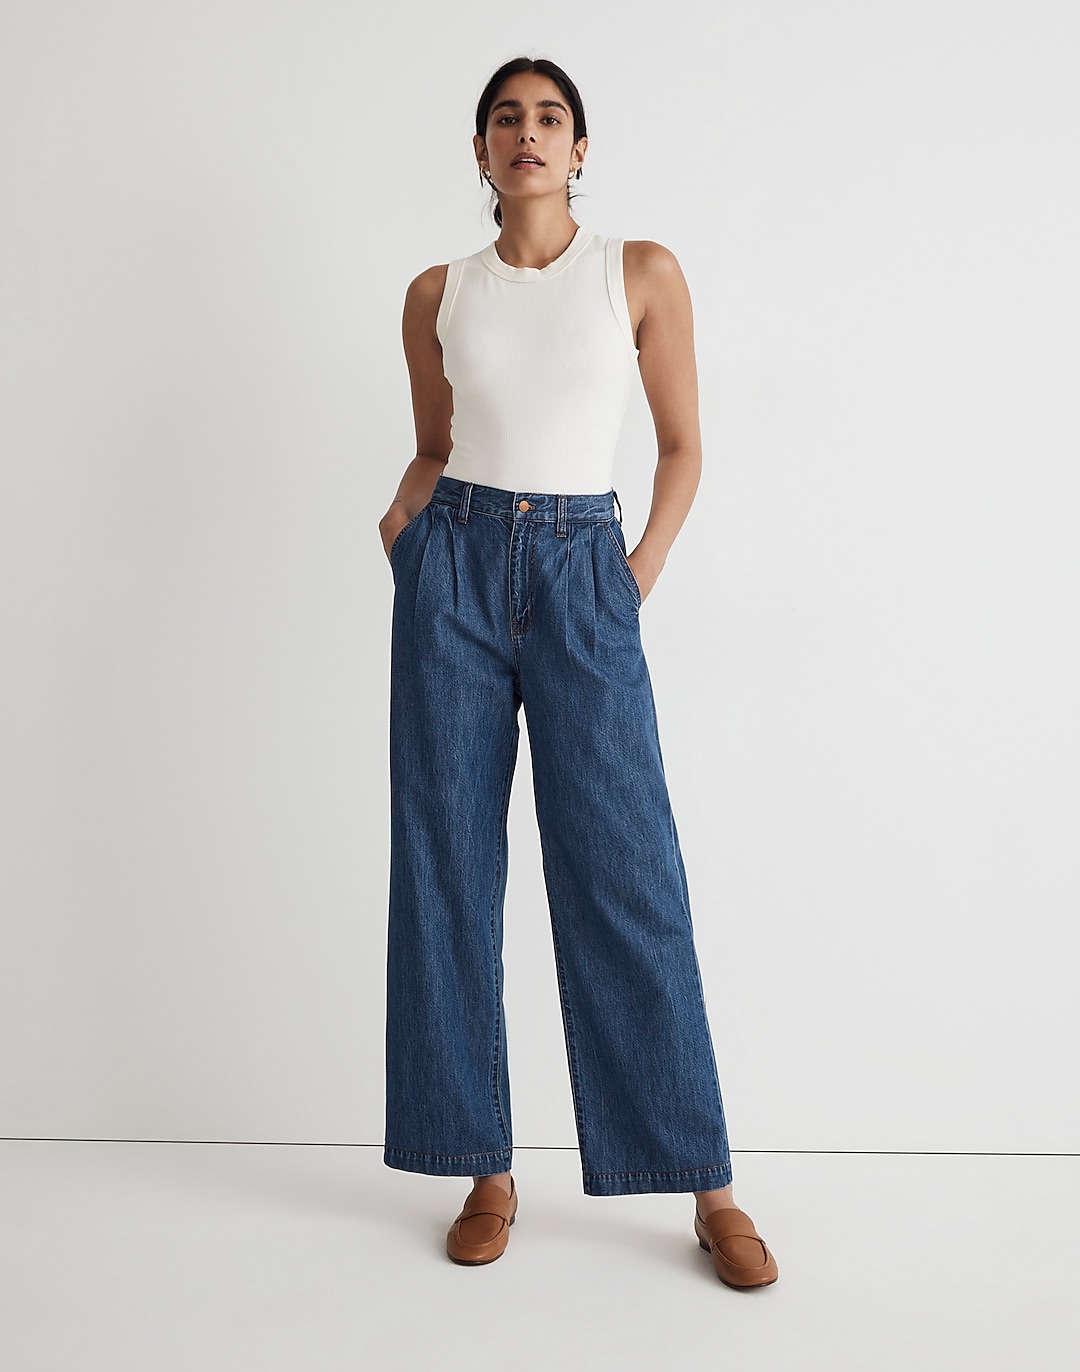 The Harlow Wide-Leg Jean in Fairson Wash | Madewell